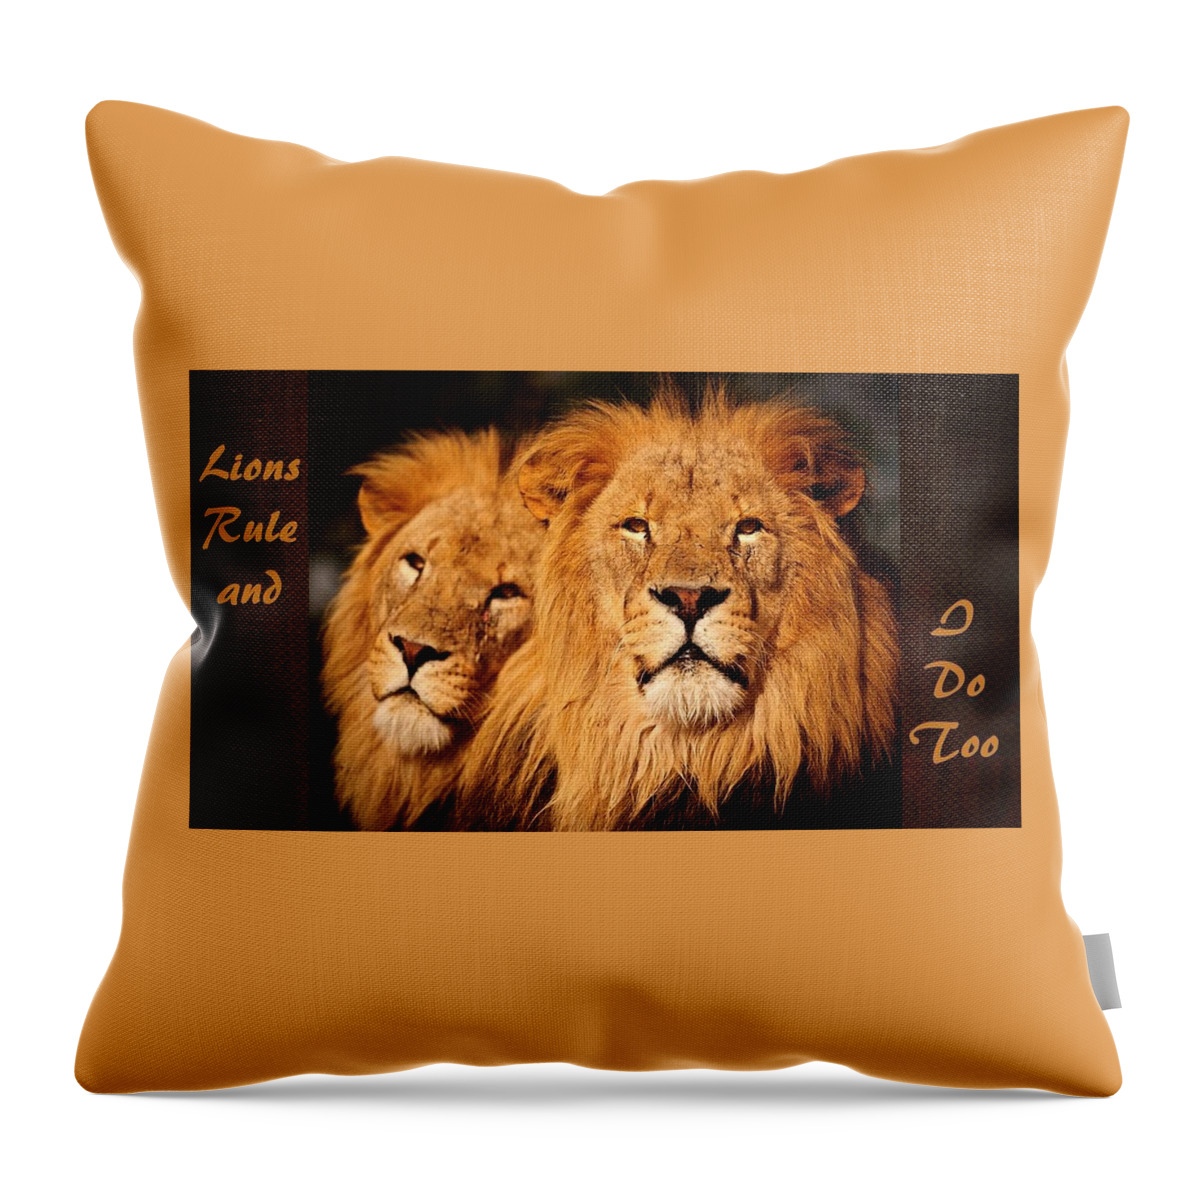 Lions Throw Pillow featuring the mixed media Lions Rule and I Do Too by Nancy Ayanna Wyatt